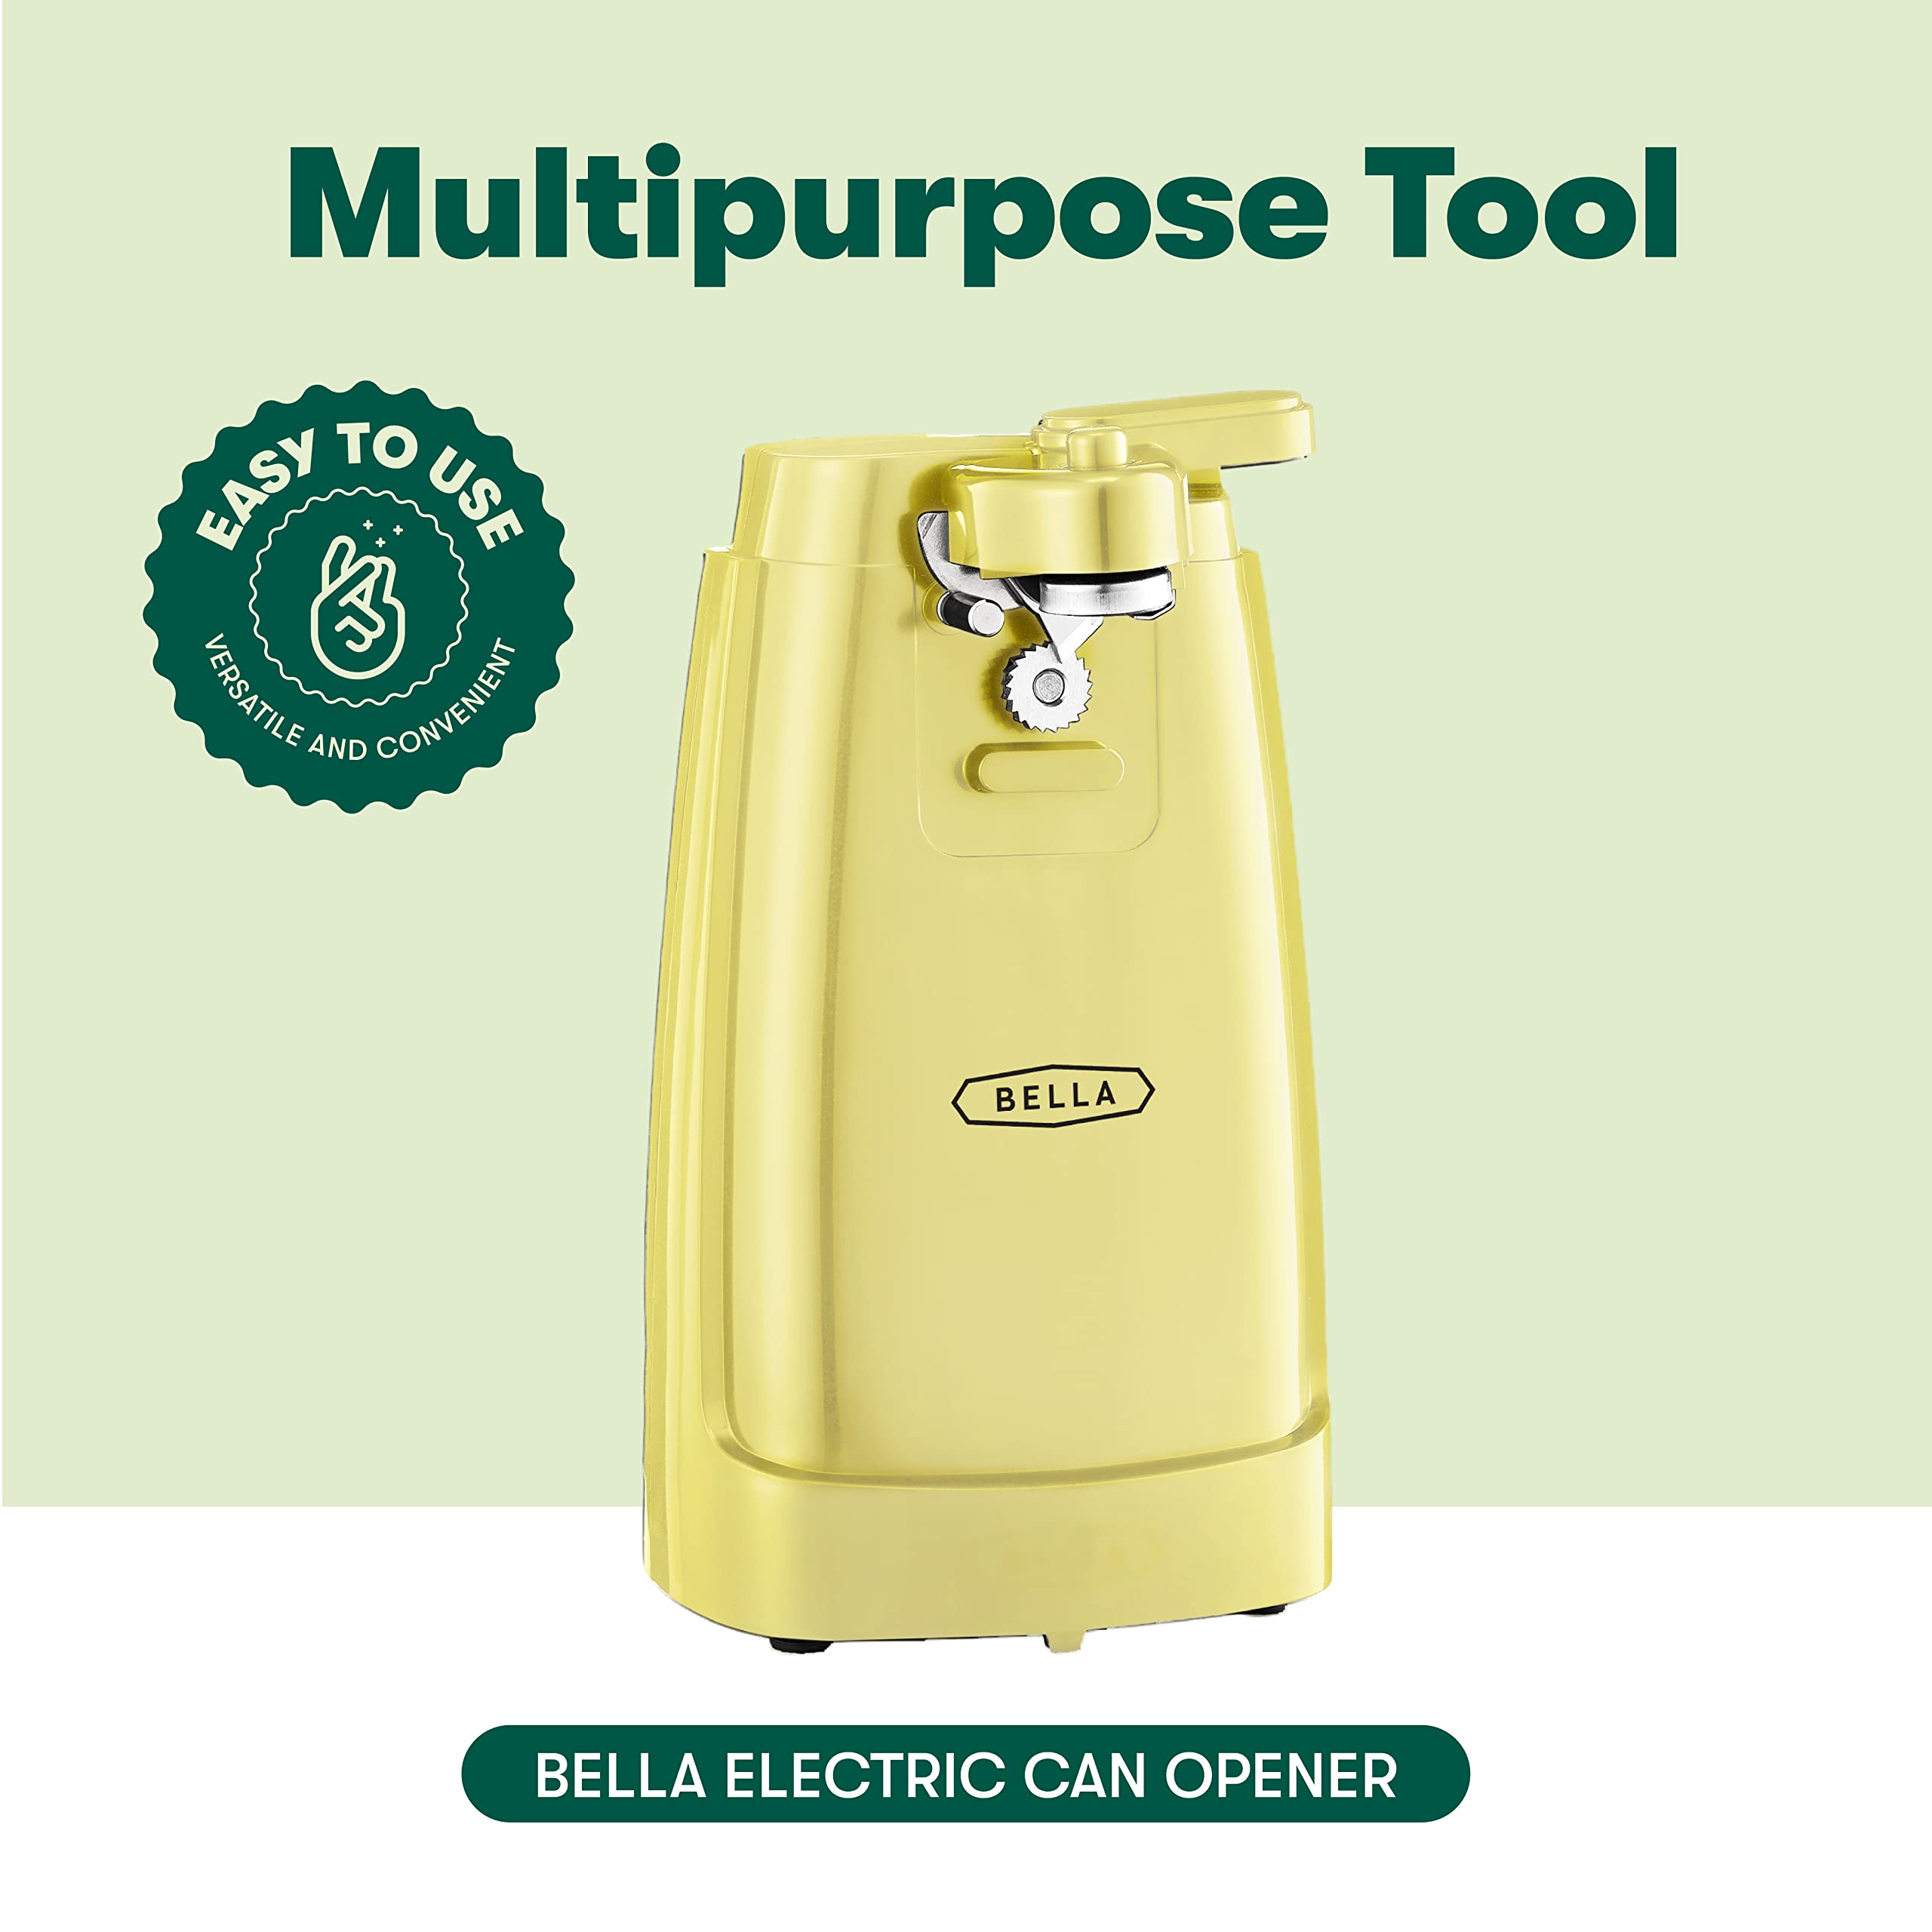 BELLA Electric Can Opener, Automatic Can Opener, Knife Sharpener and Bottle Opener, Easy Safe Removable Cutting Lever, Cord Storage, Easy Clean-Up, Yellow